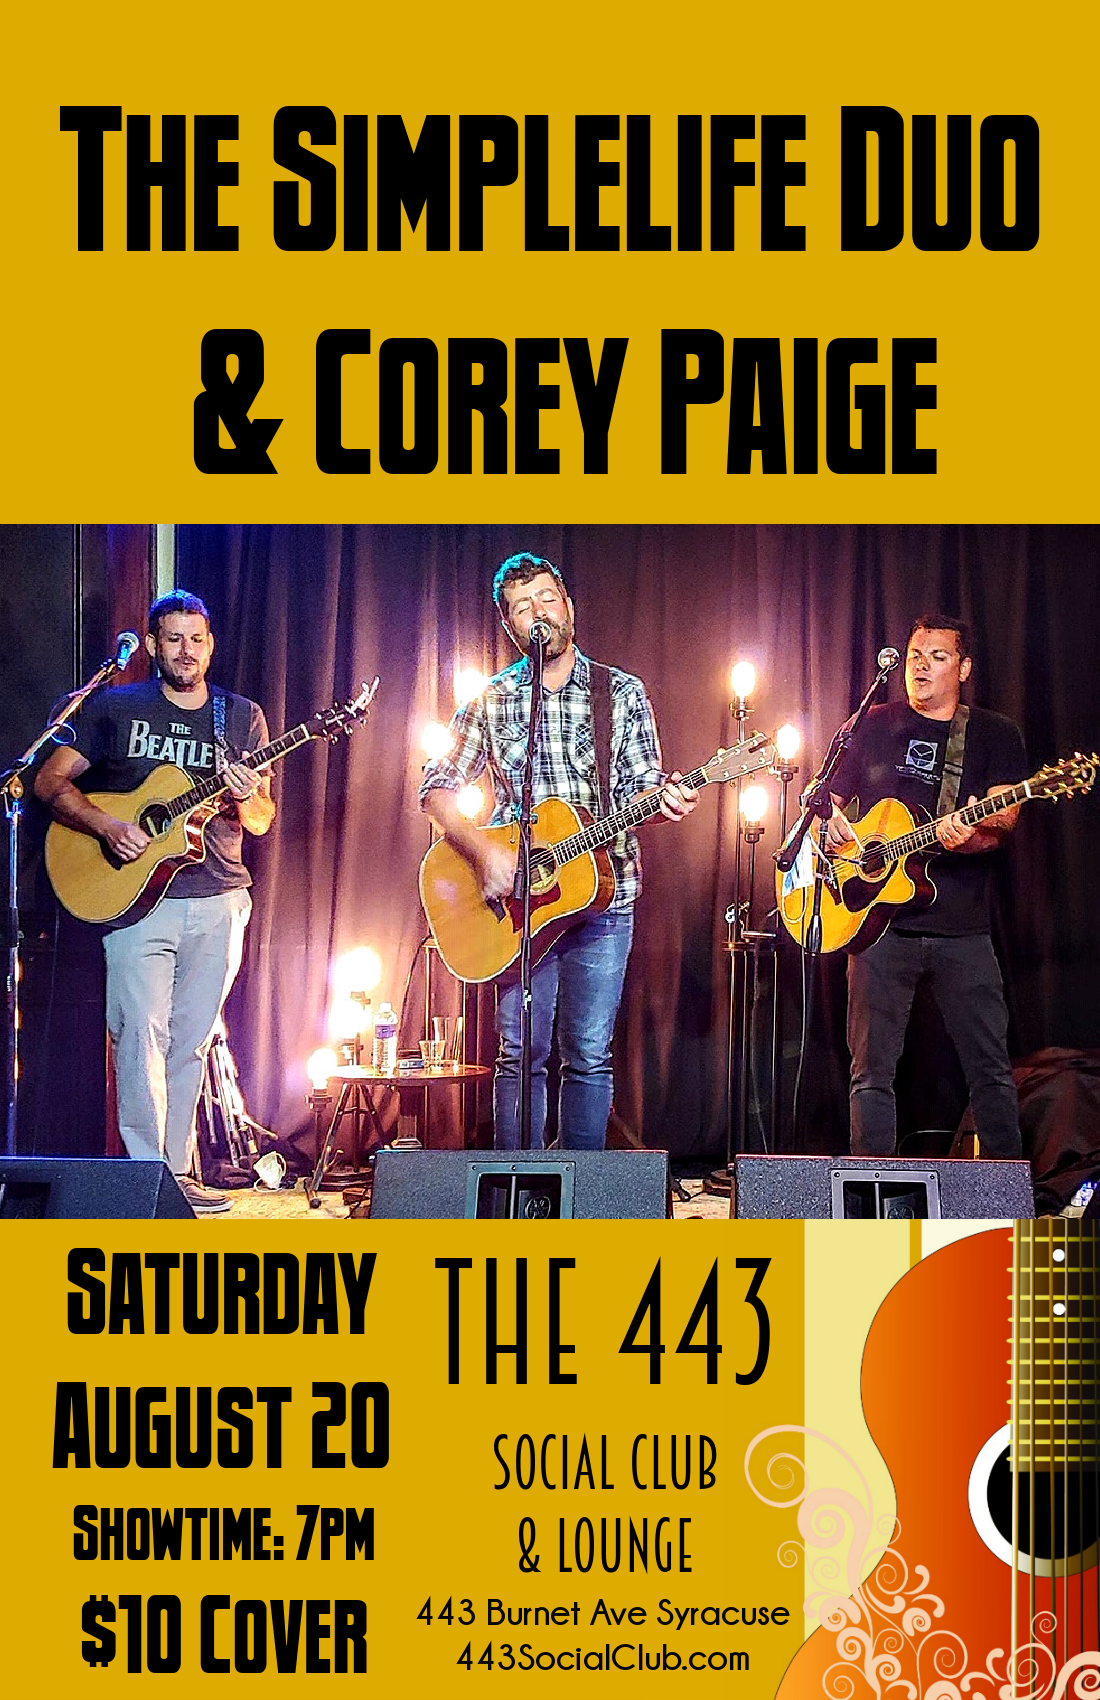 Simplelife & Corey Paige - 8/20 - The 443 Social Club & Lounge